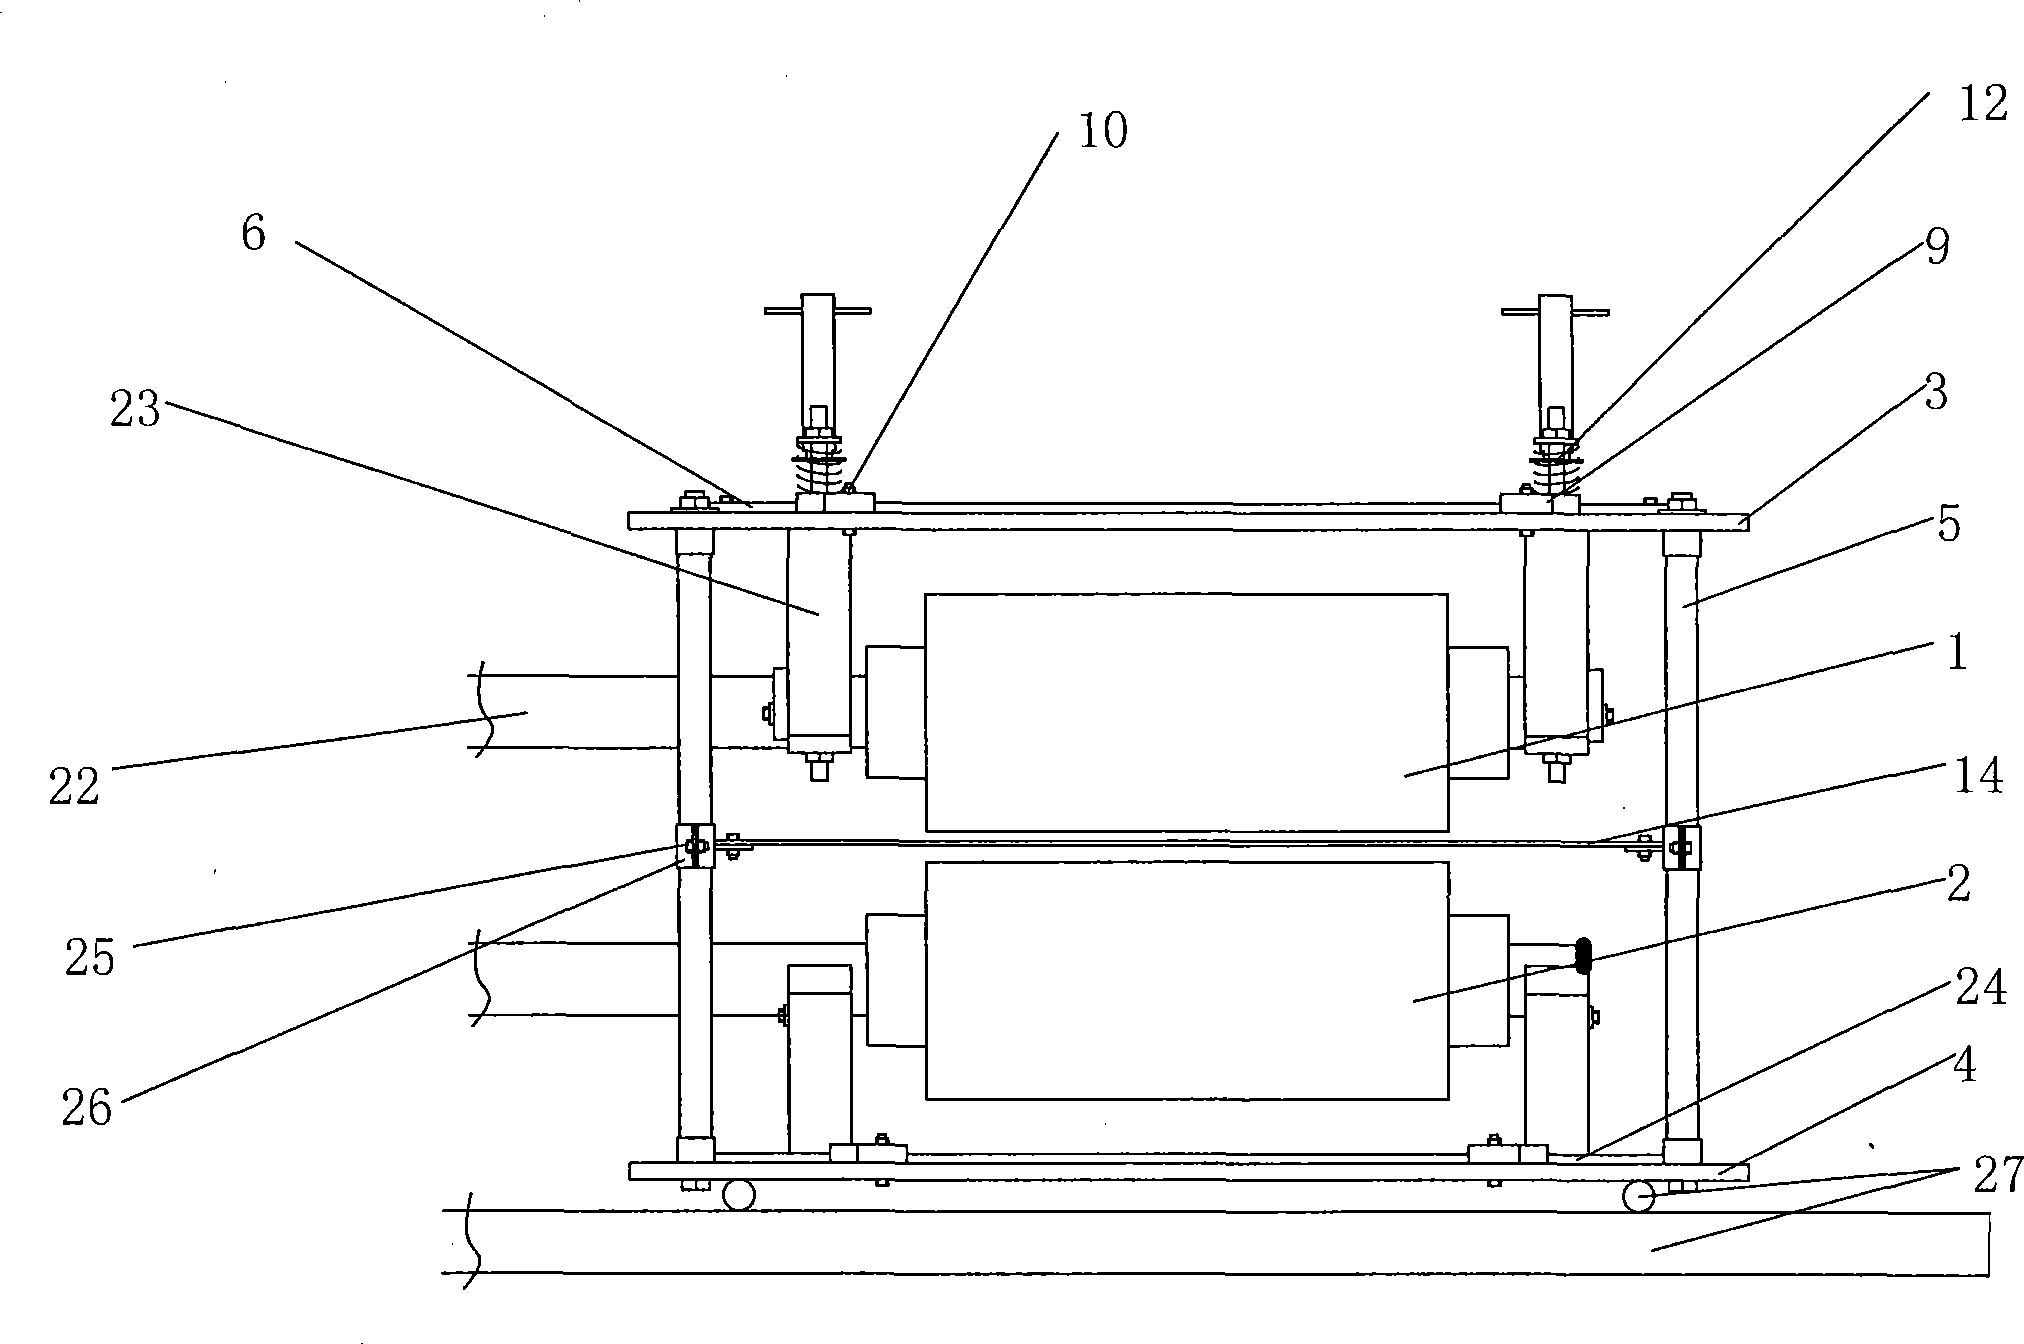 Assembled duo mill